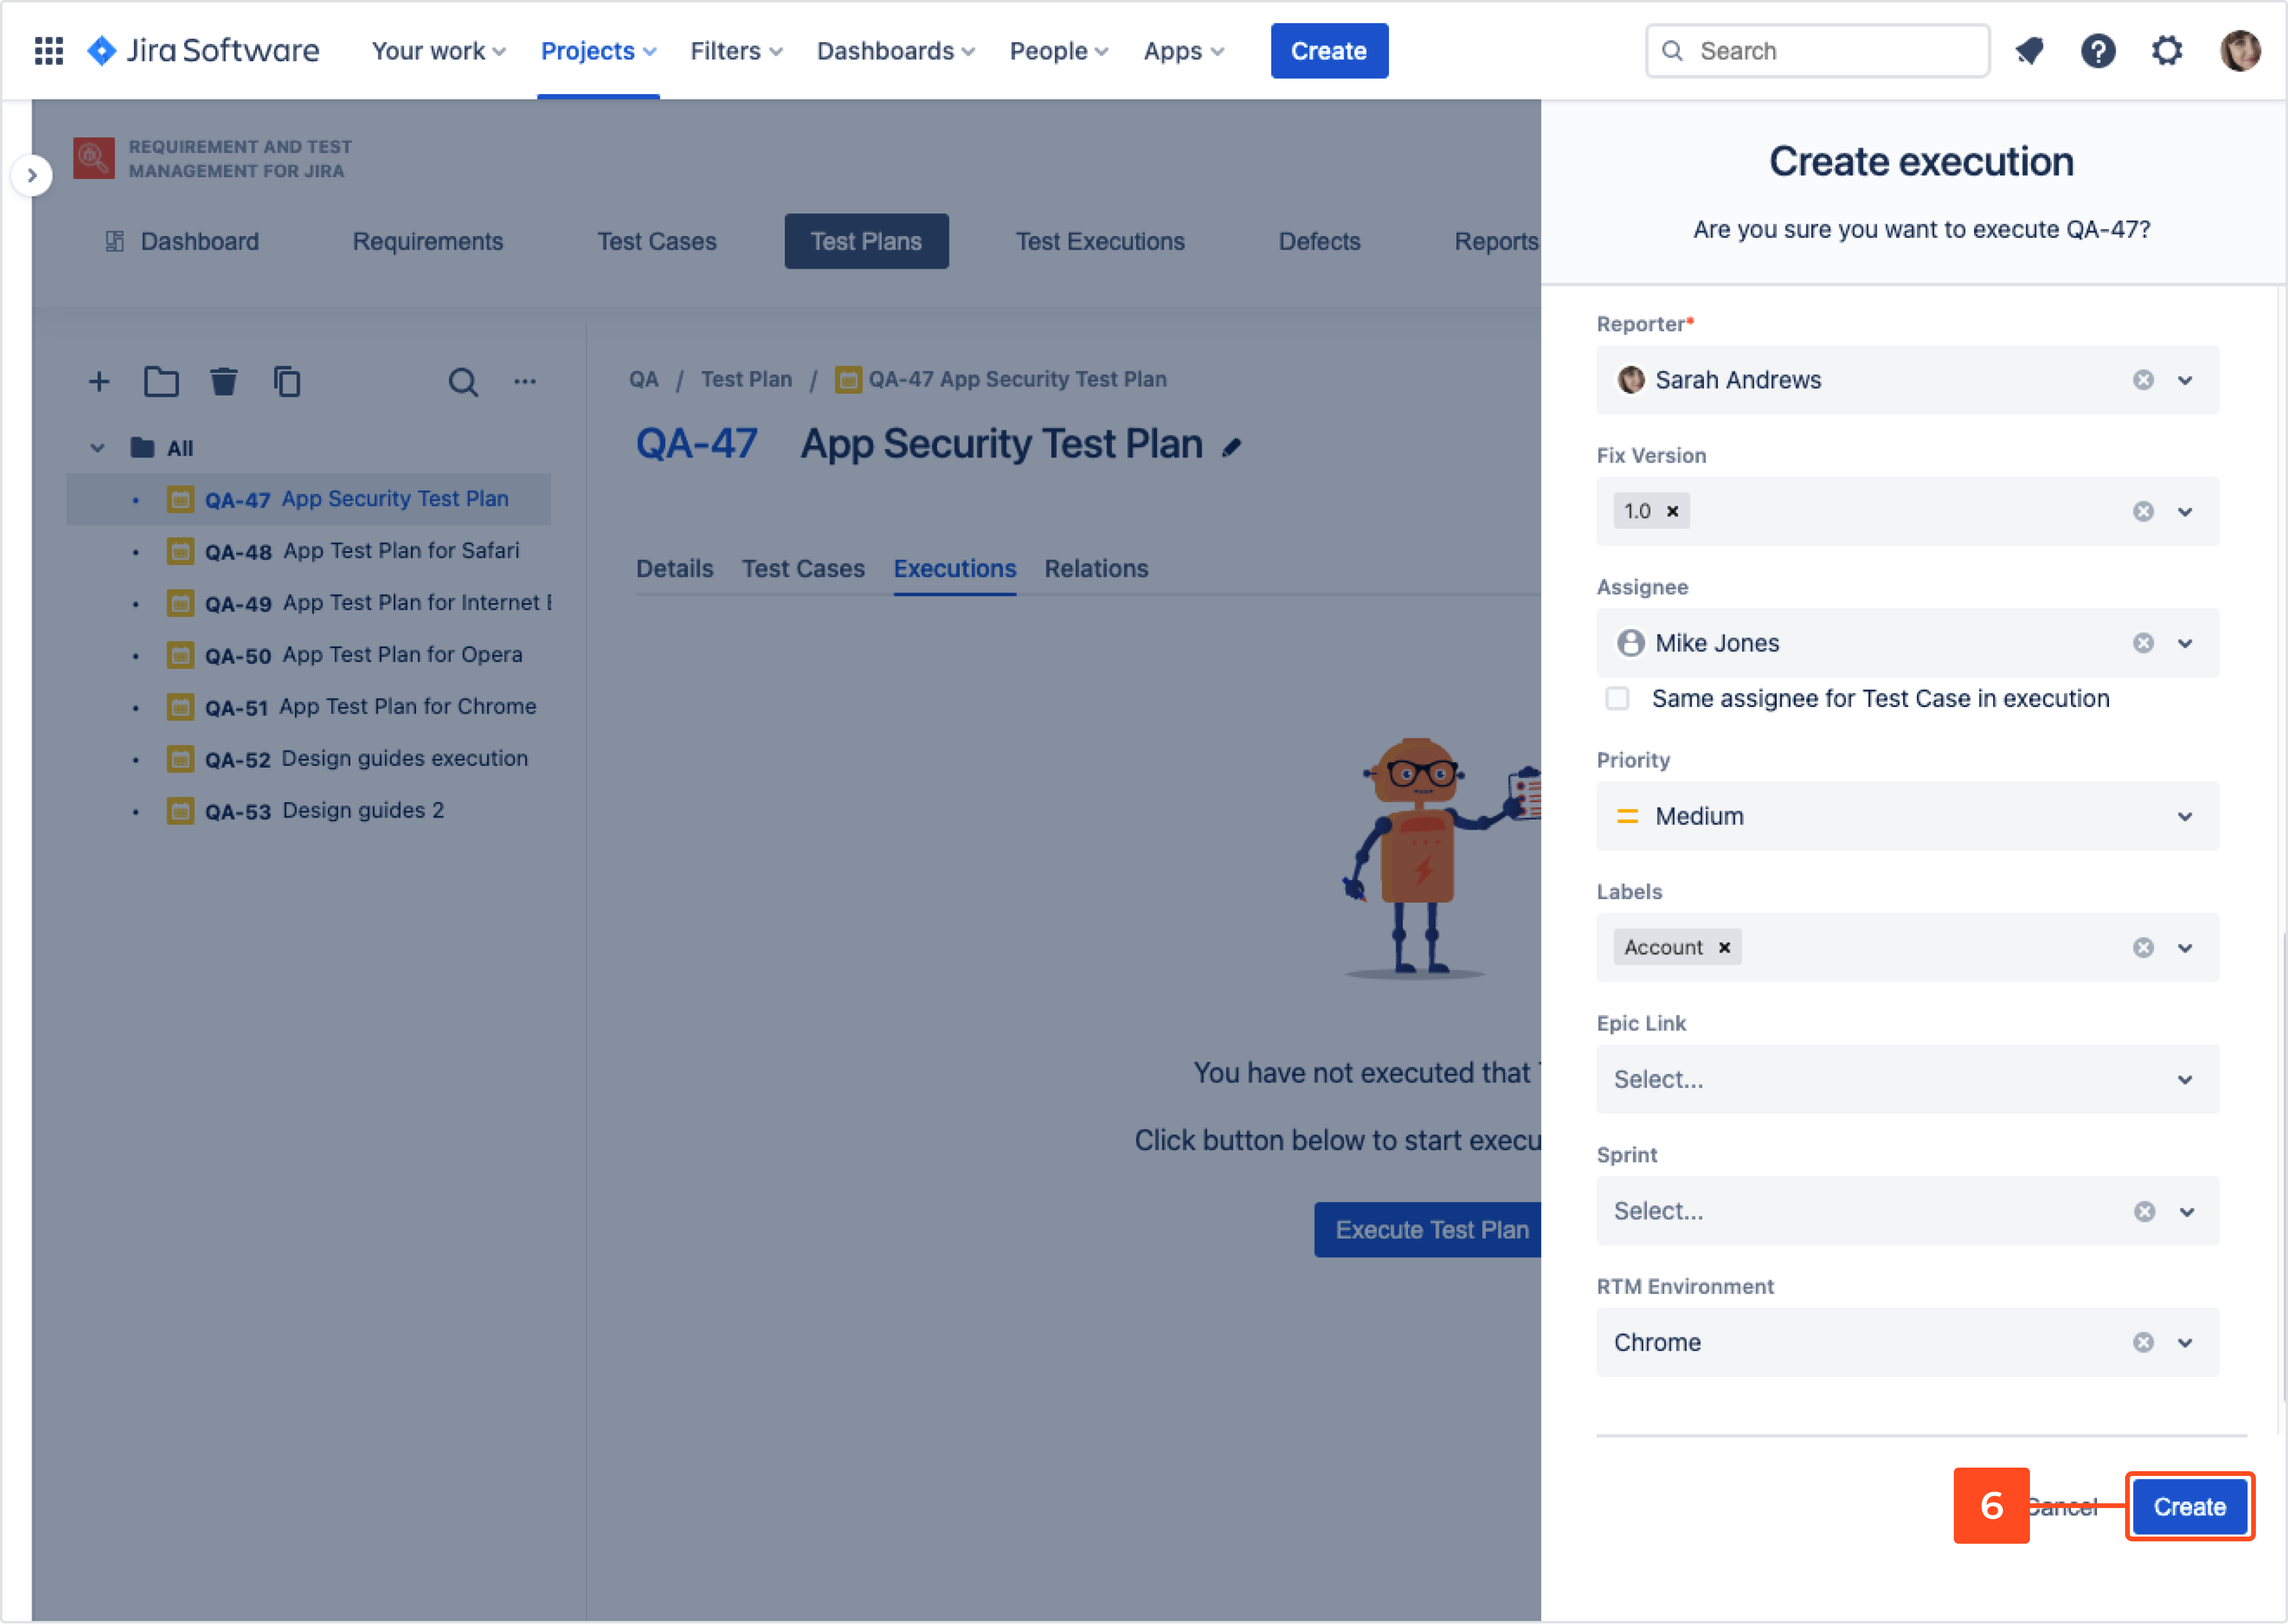 Execute Test Plan with Requirements and Test Management for Jira app